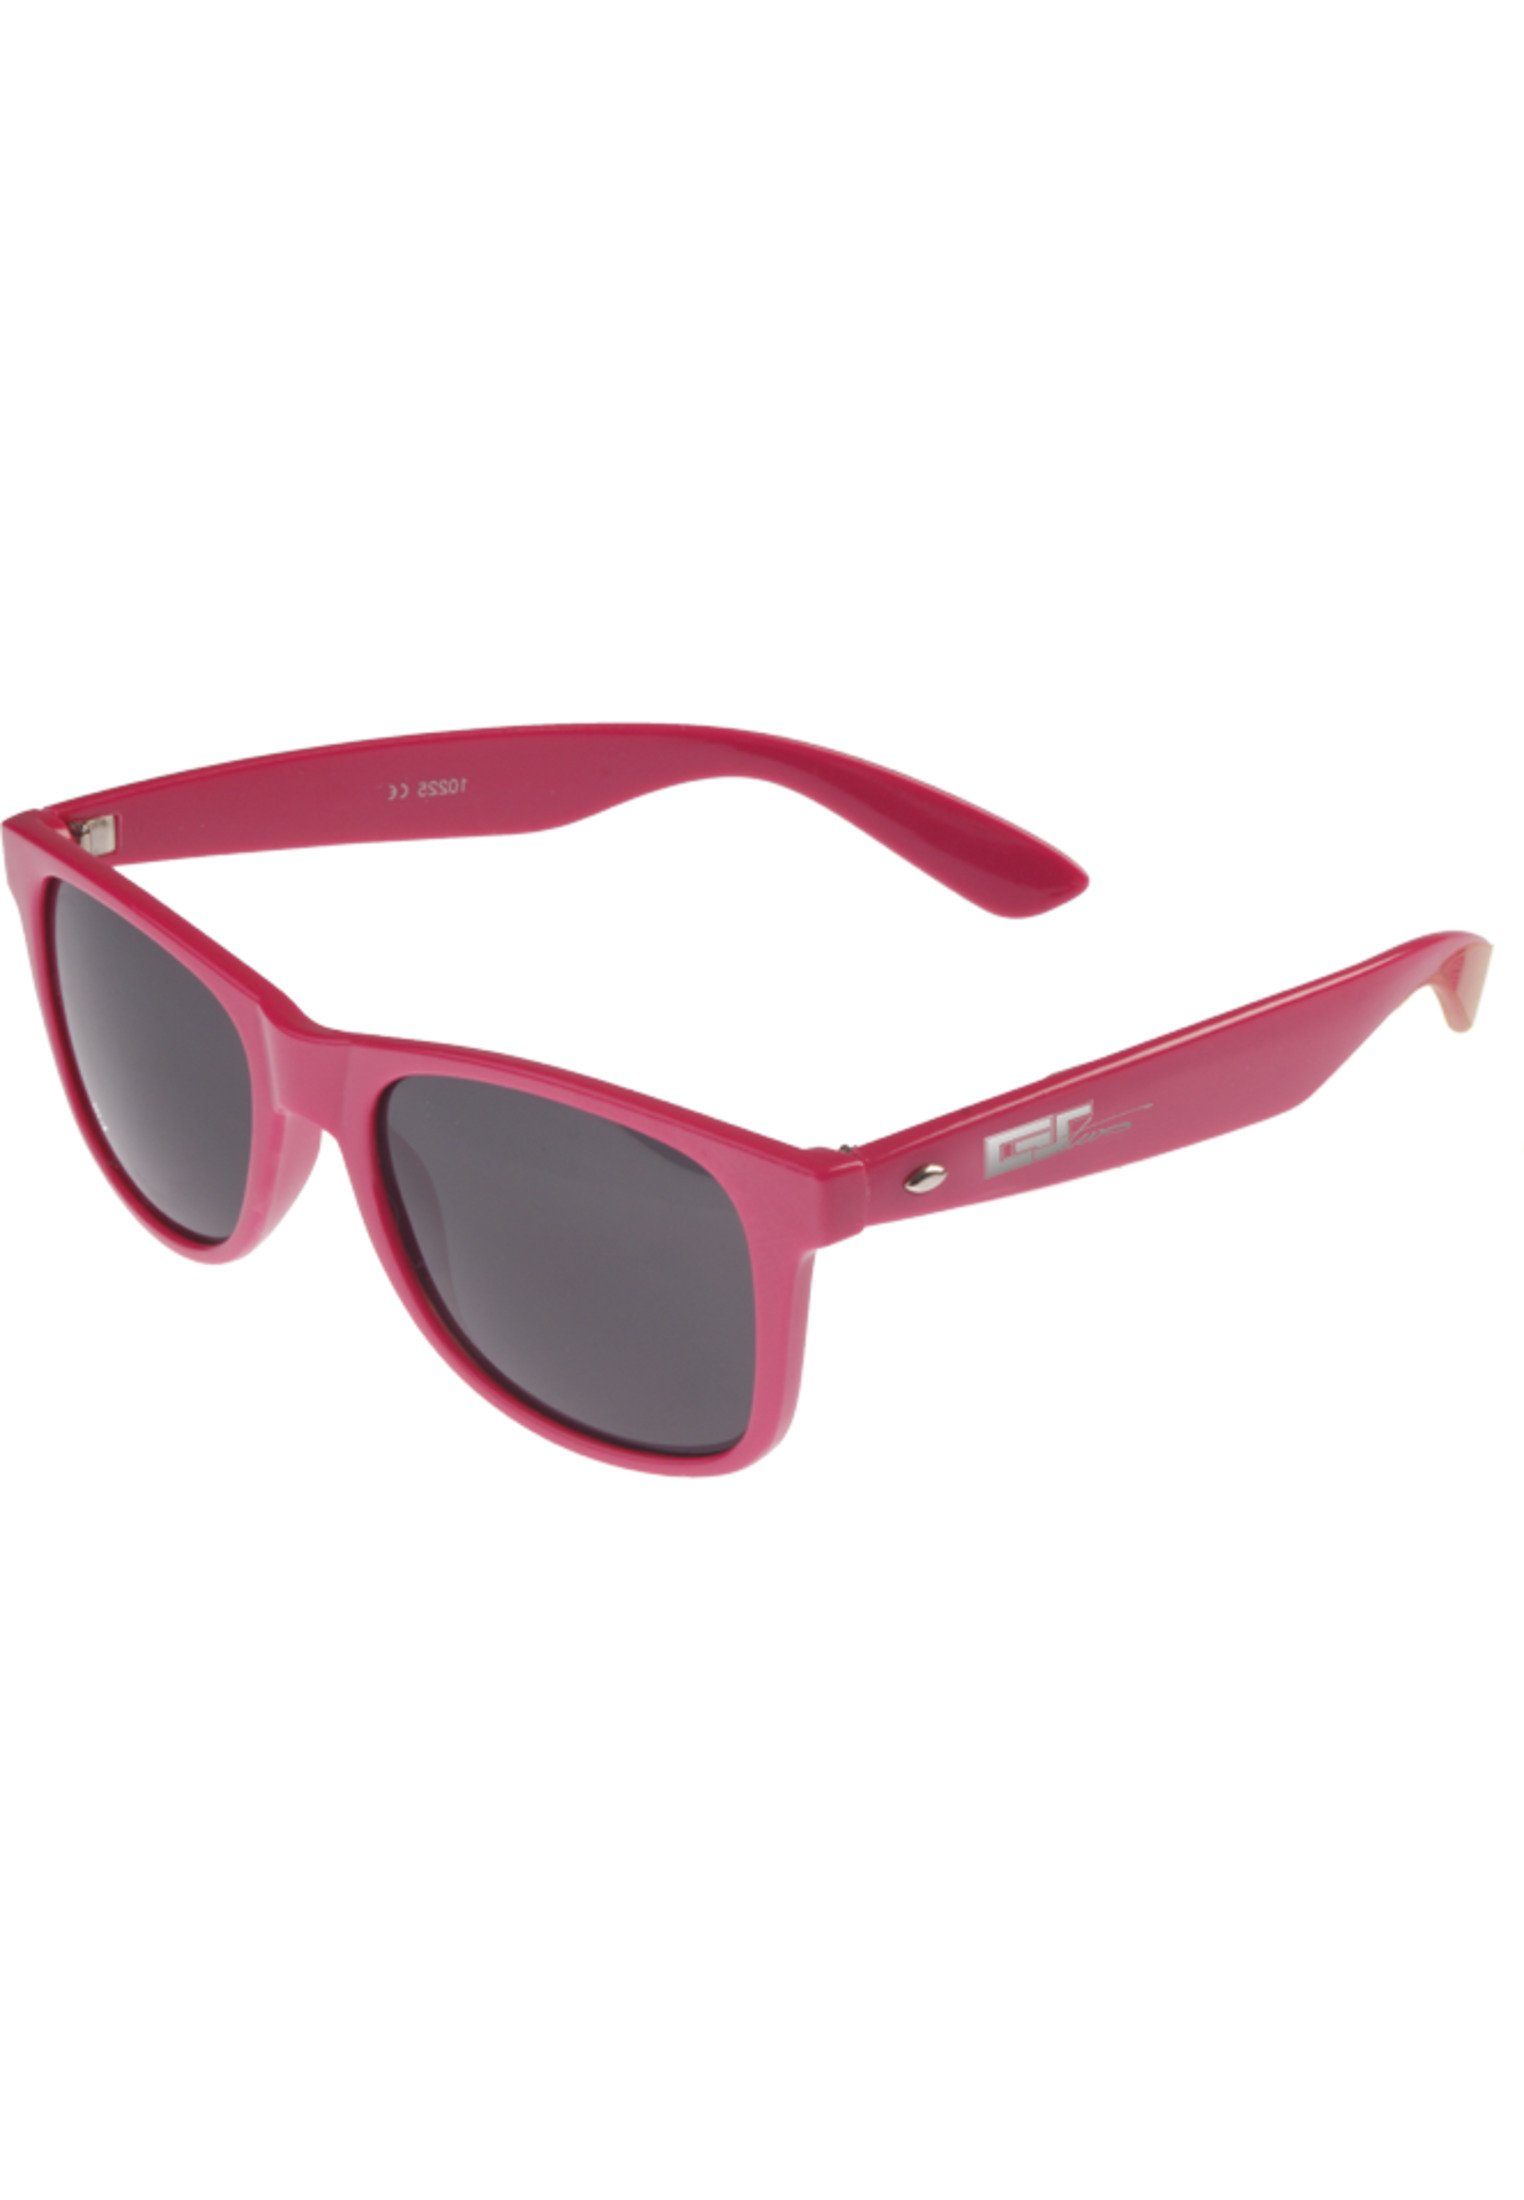 MSTRDS Sonnenbrille Accessoires Groove Shades magenta GStwo